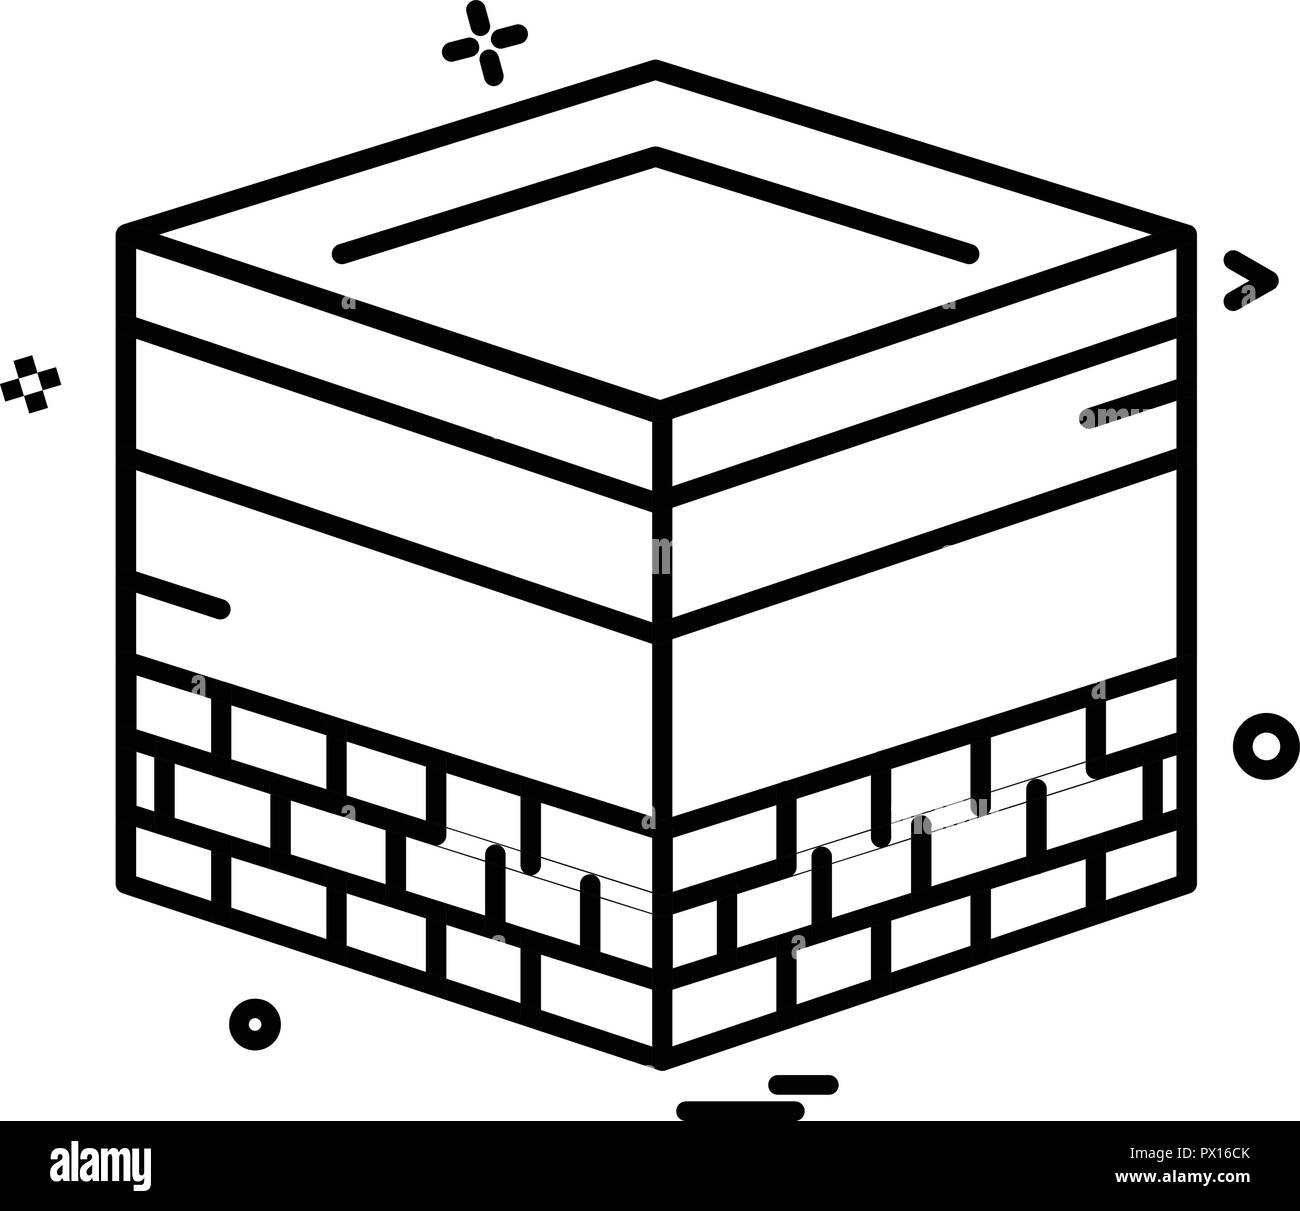 Kaaba Coloring Pages